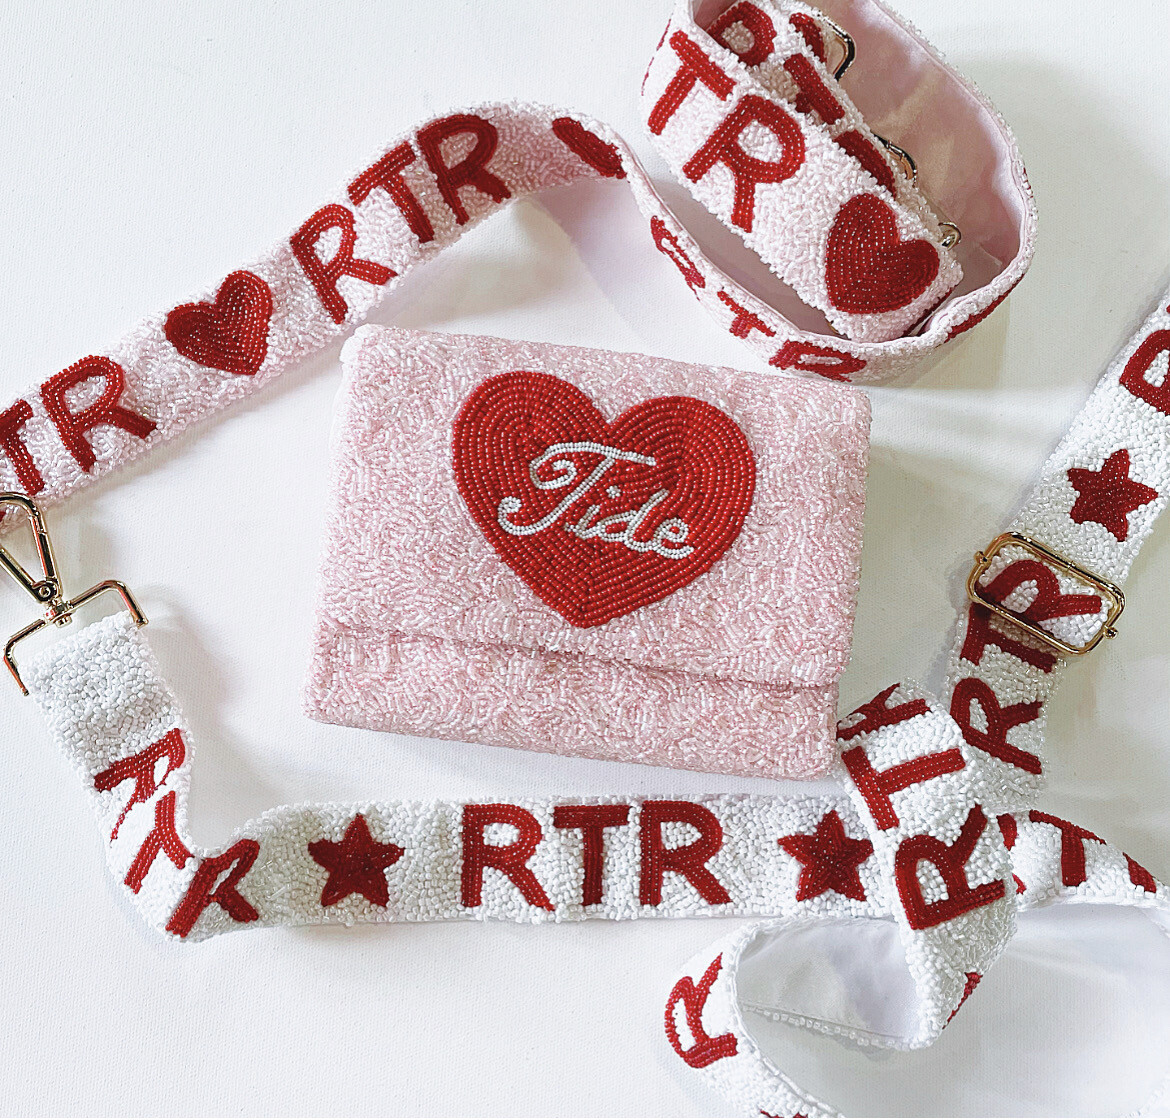 RTR Gameday Bag Strap (pink heart)